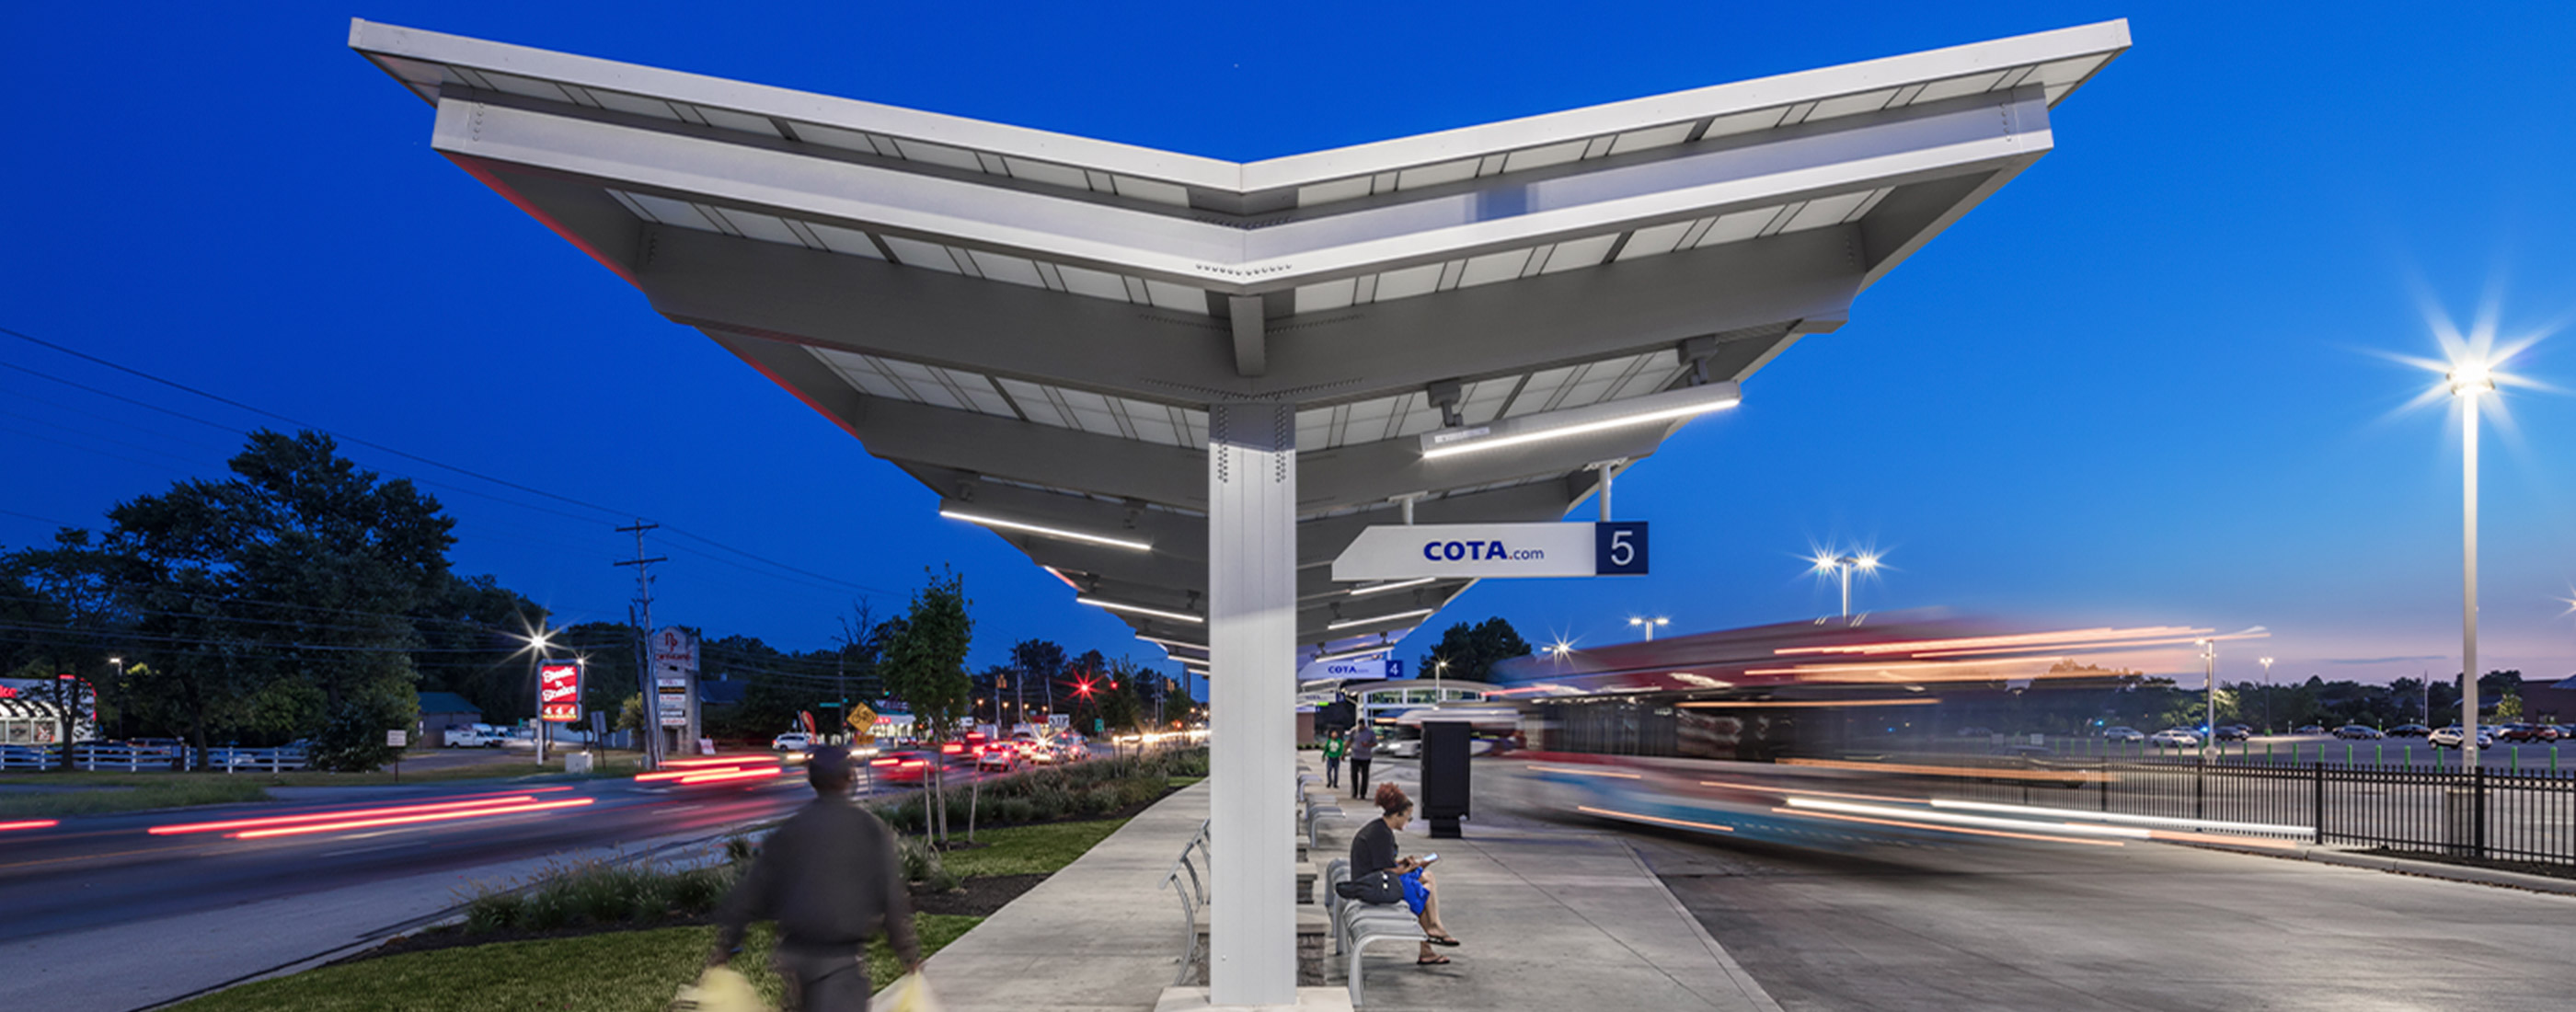 Residents and workers wait under shelter to use COTA's CMAX bus rapid transit.